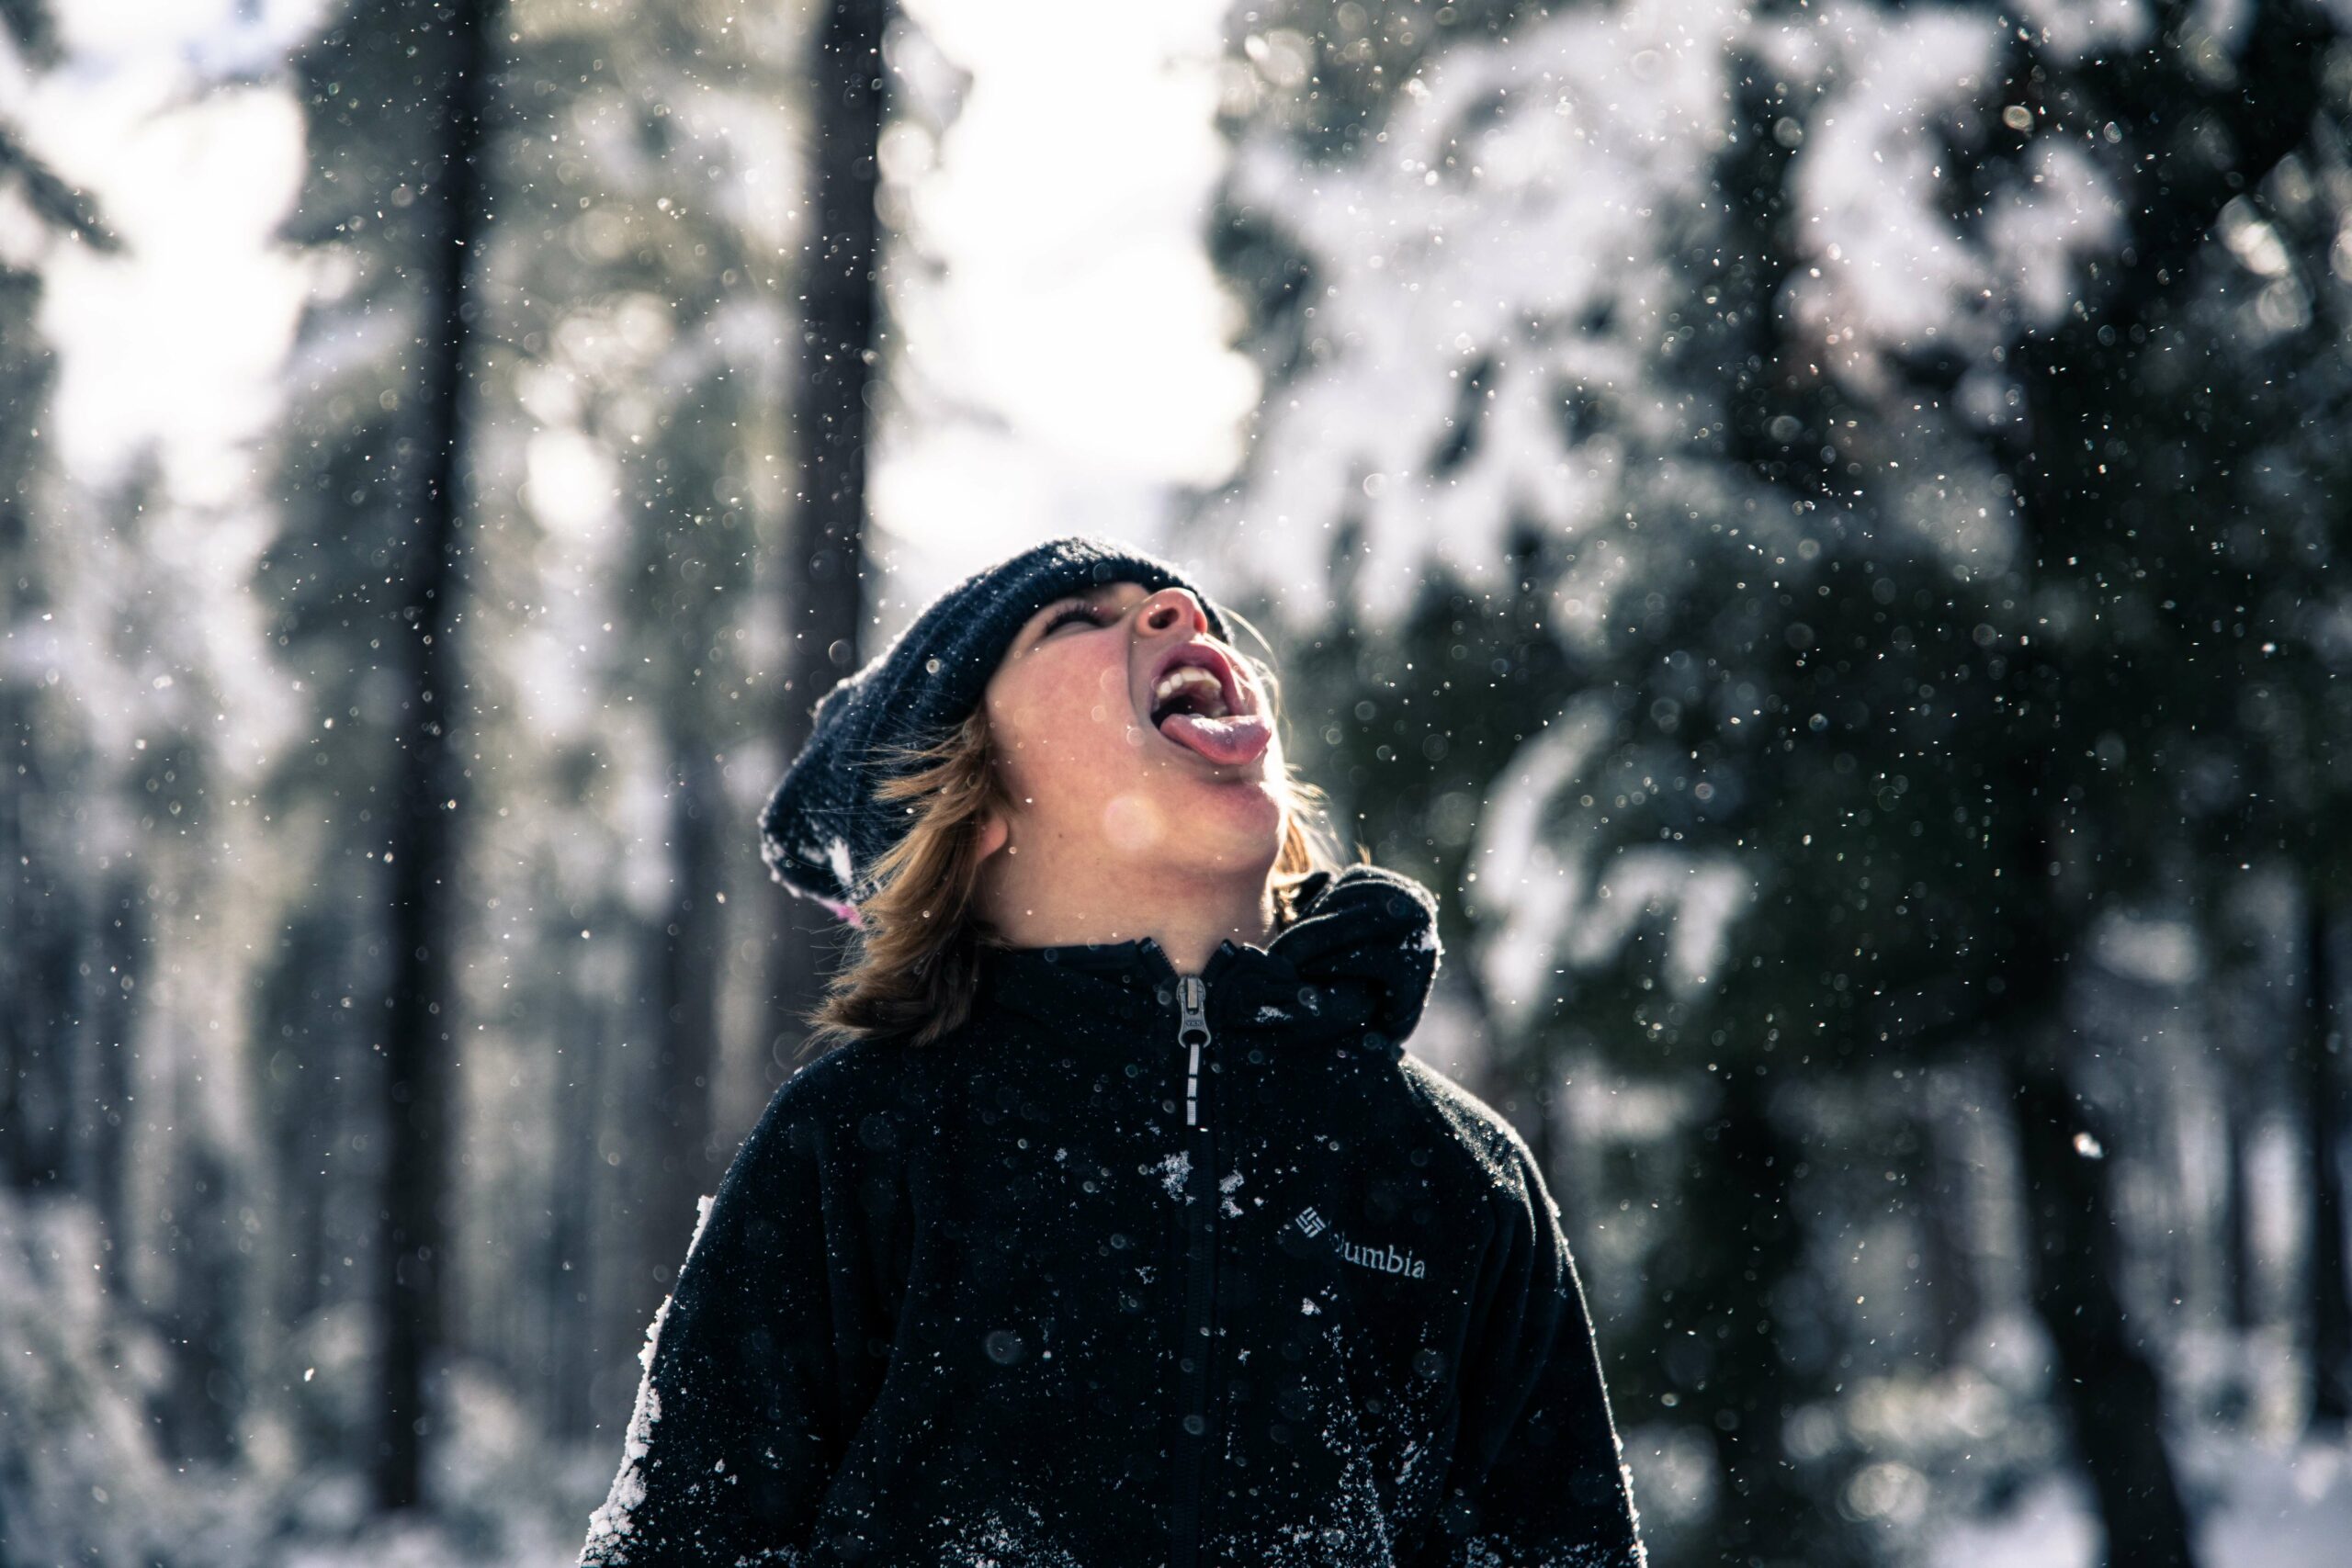 Young boy catching snowflakes on his tongue in the forest